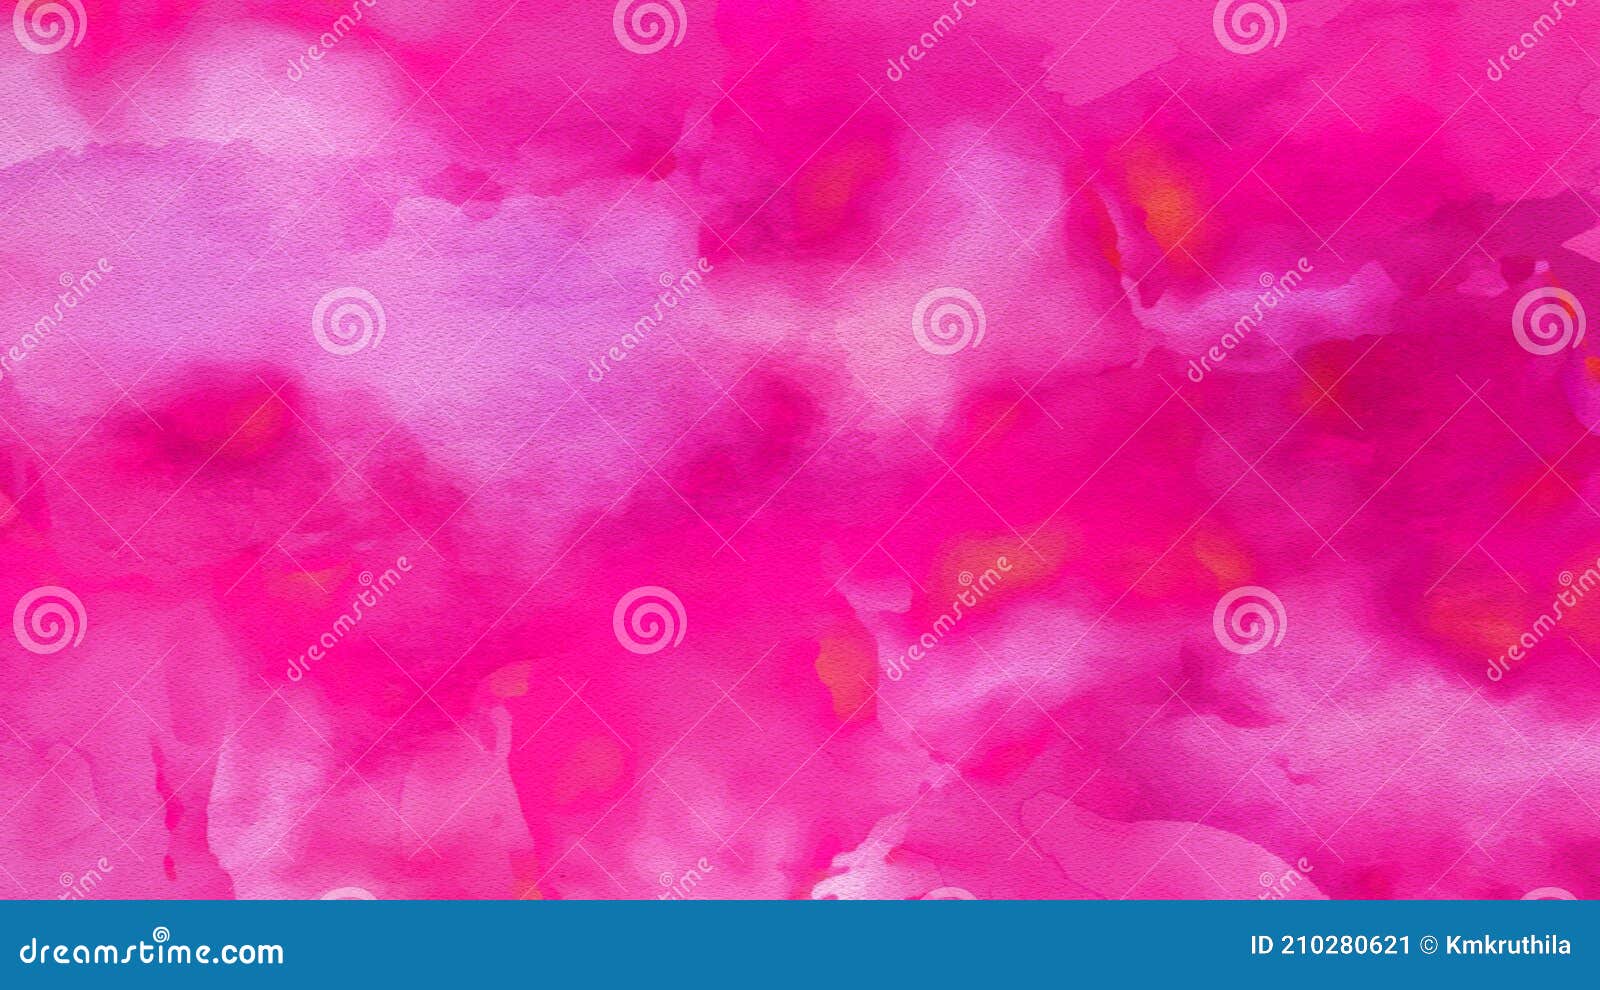 Pink Watercolor Background stock illustration. Illustration of colour ...